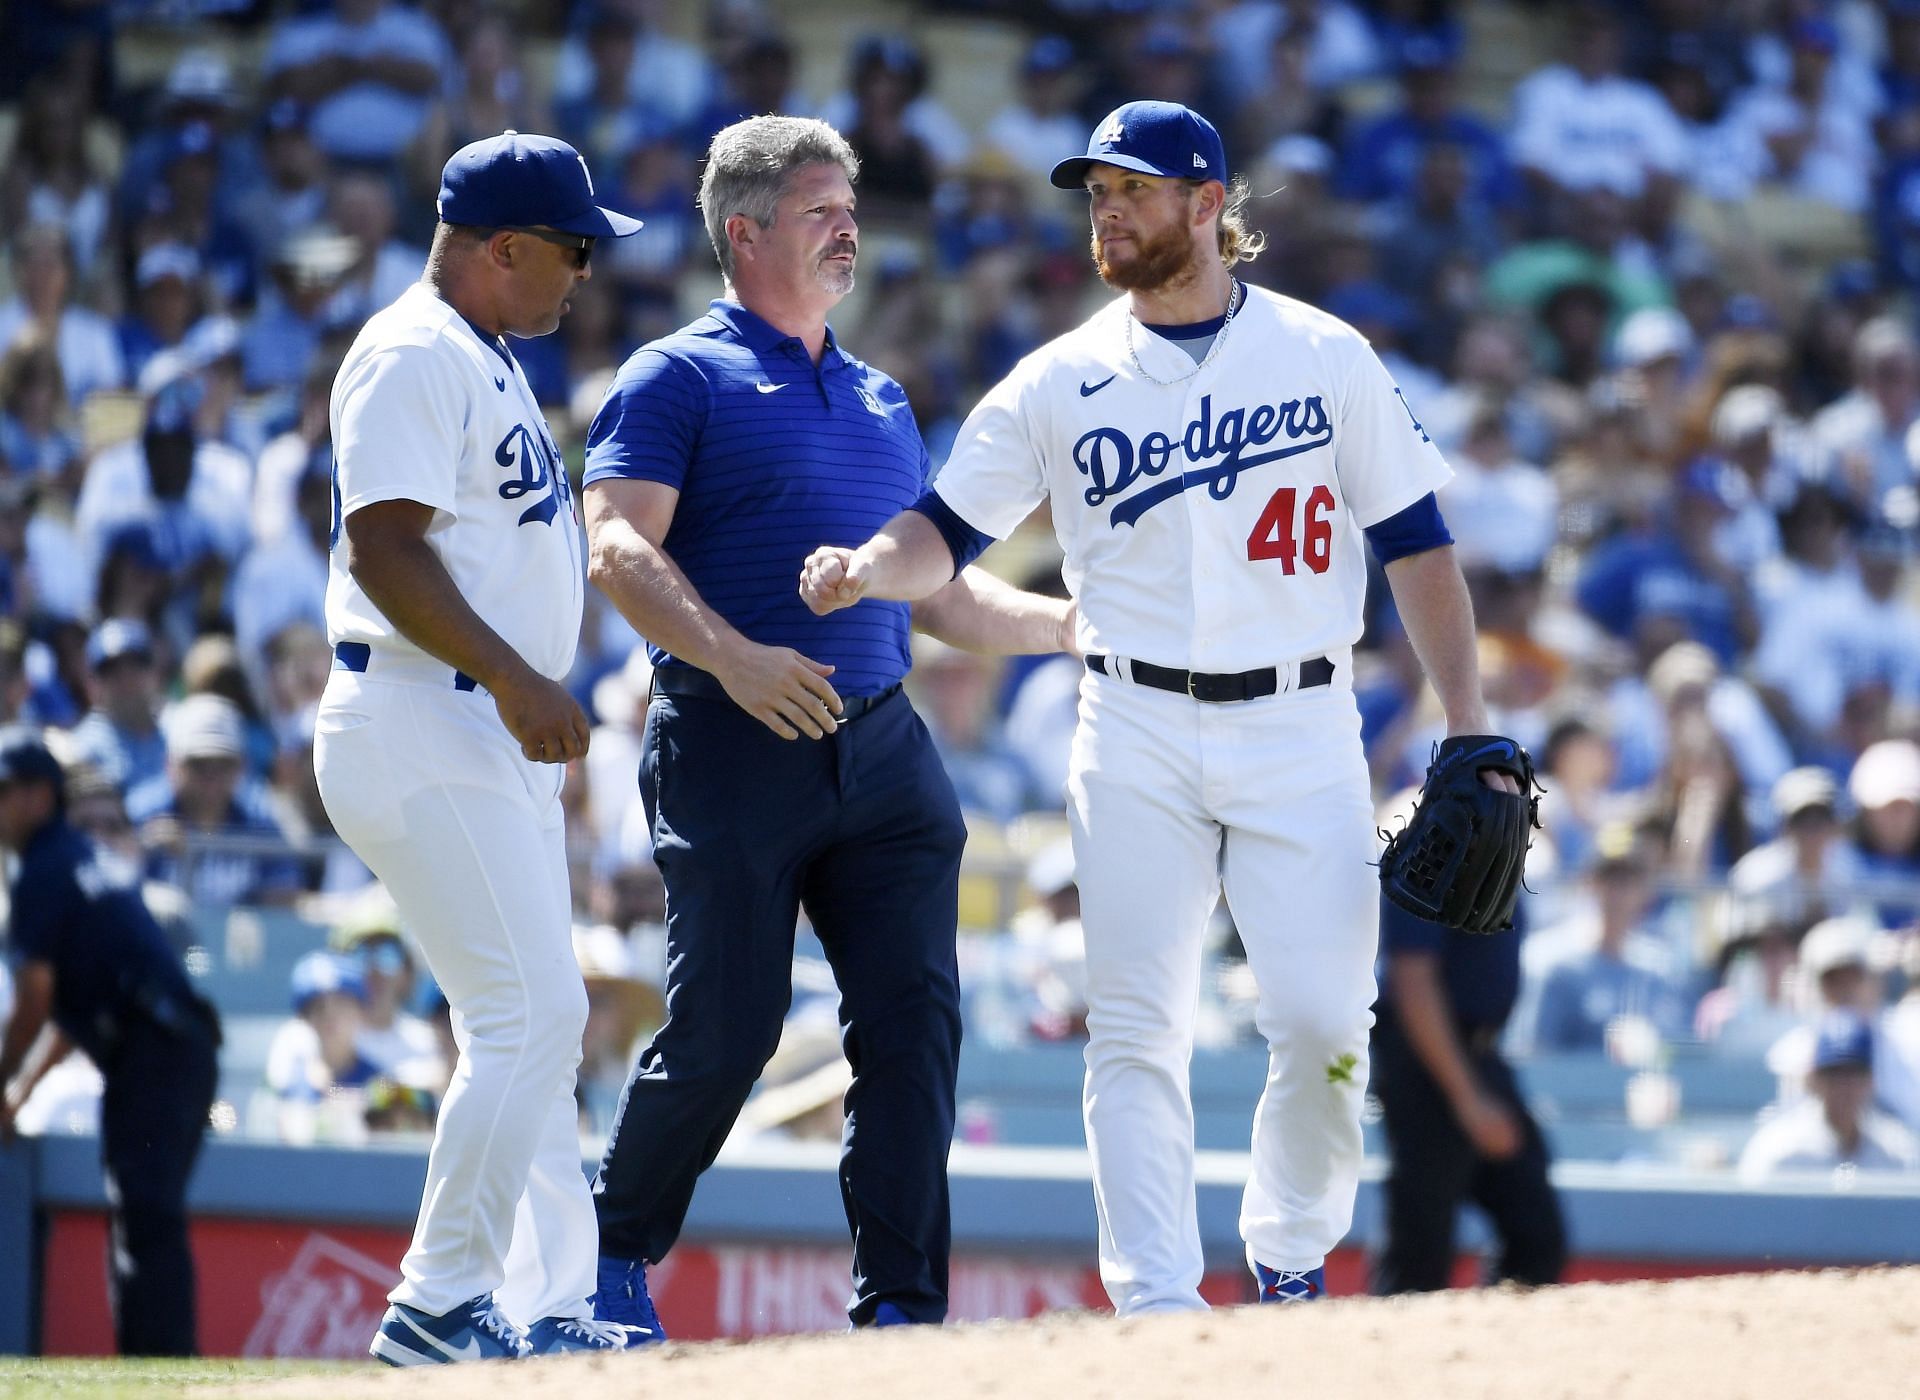 Los Angeles Dodgers closer Craig Kimbrel gets checked after being hit by a ball.